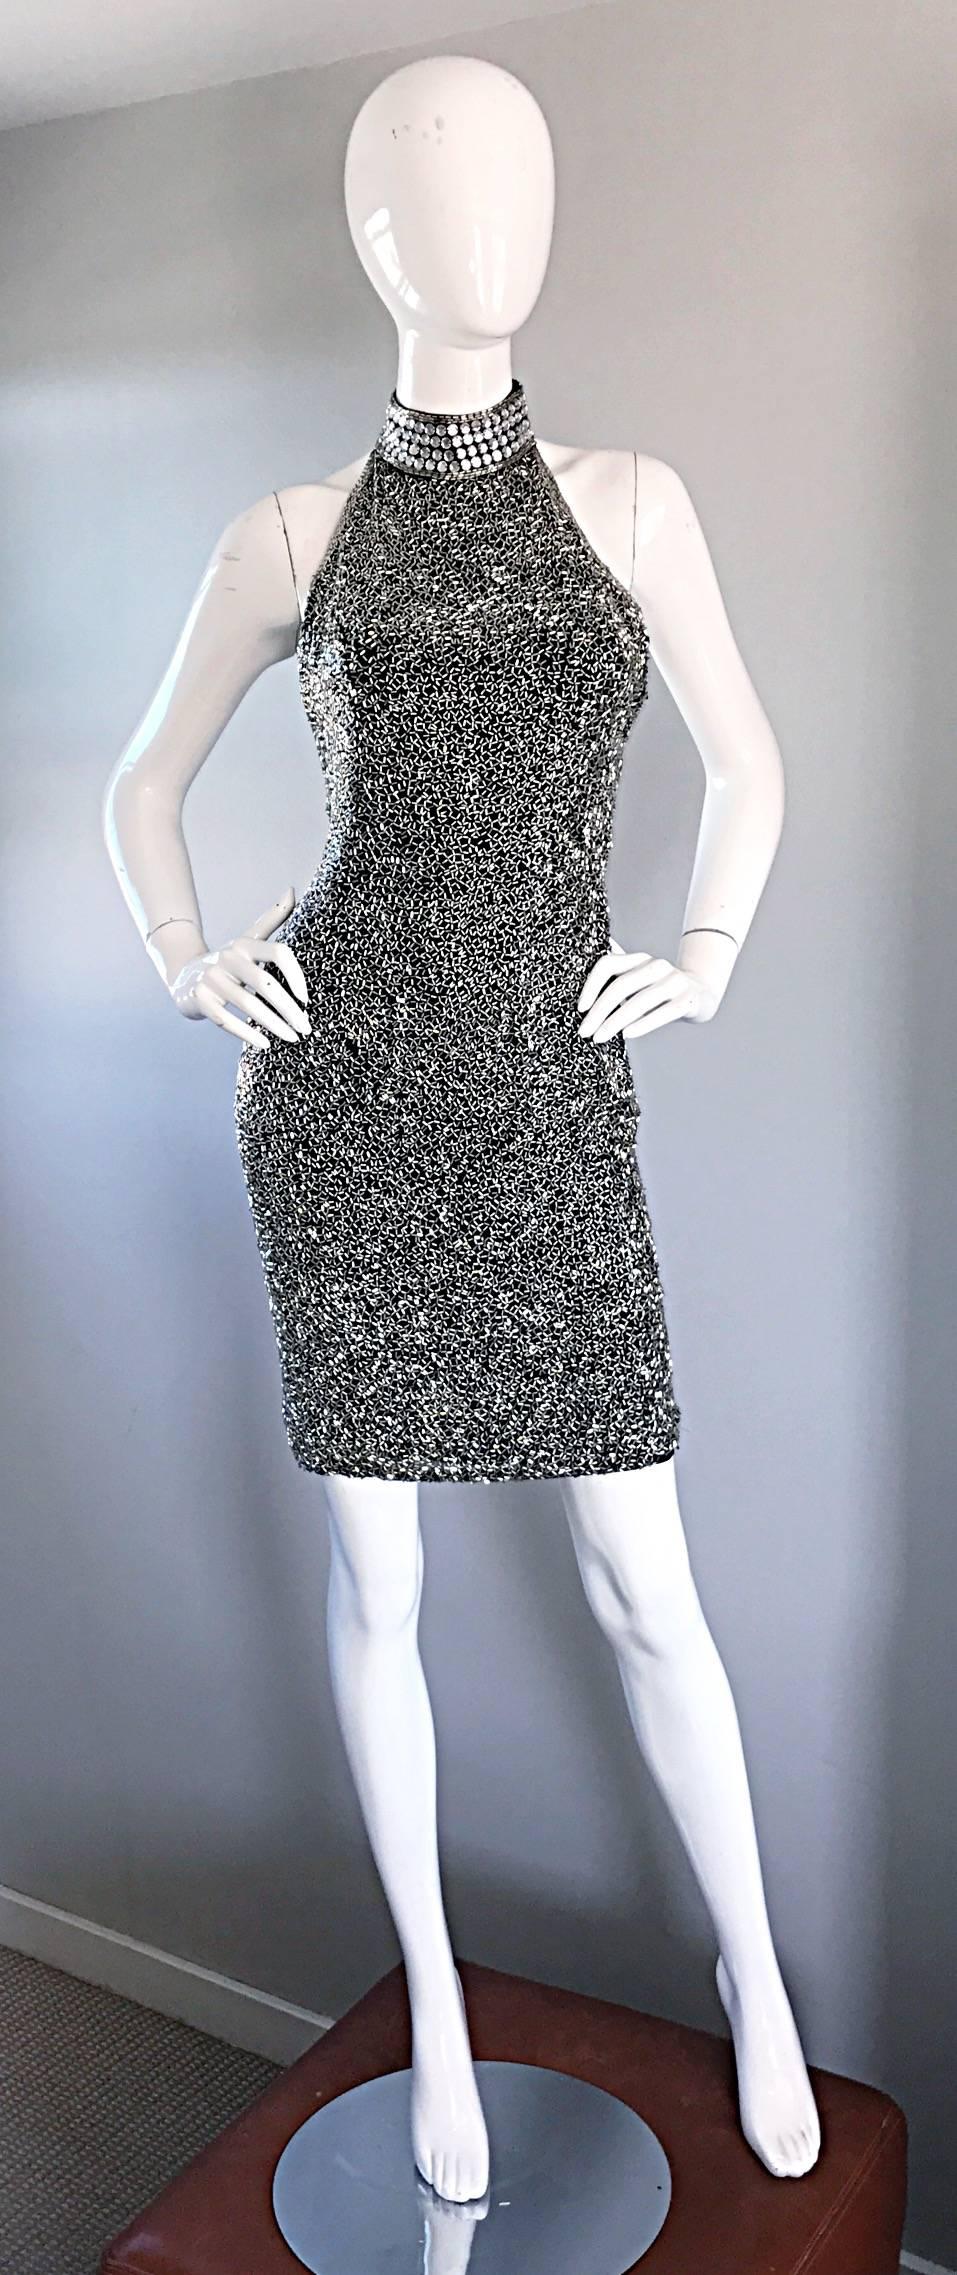 Sexy vintage 1990s / 90s LILLIE RUBIN black and silver heavily beaded silk cocktail mini dress! Features thousands of hand-sewn silver beads throughout the entire dress. Oversized silver crystals adorn the back panel and the neck. Super flattering